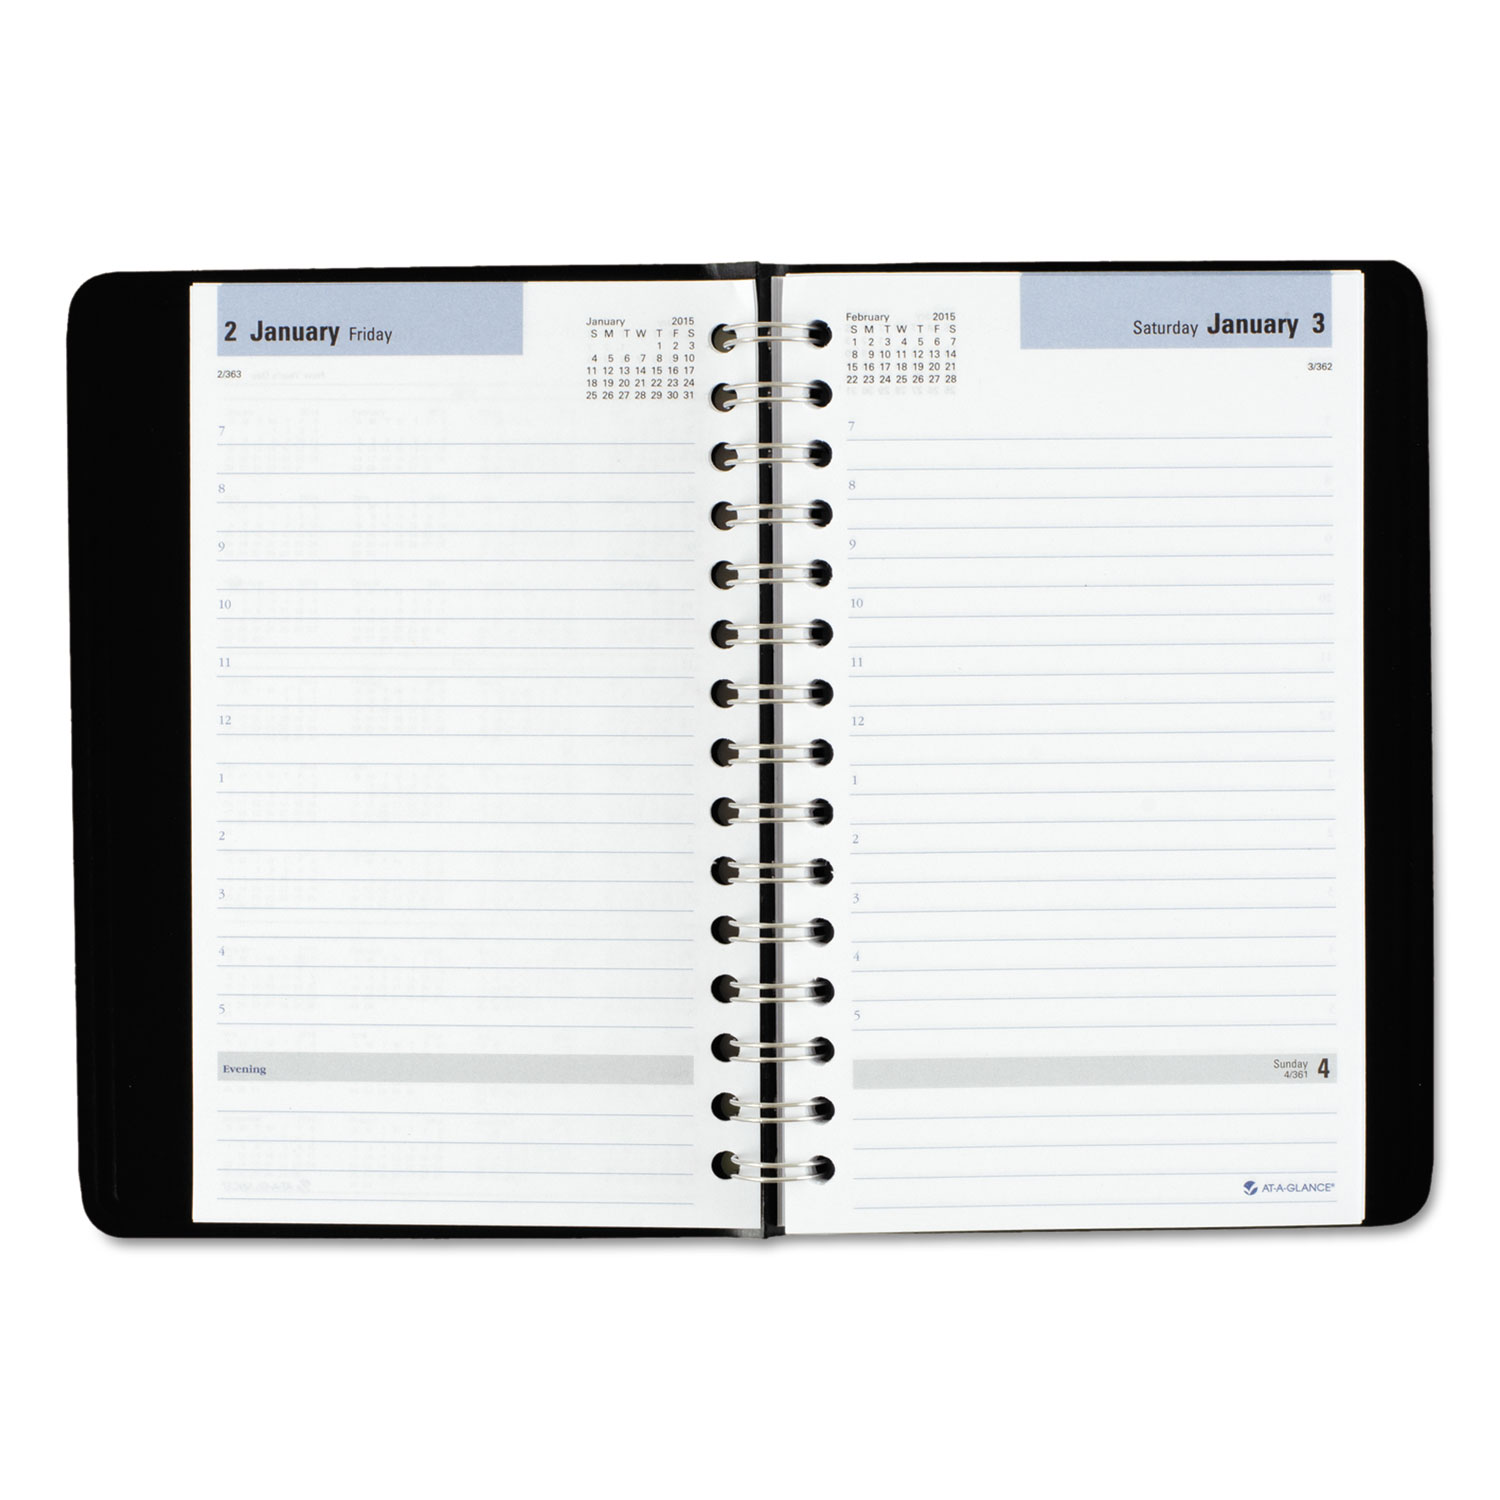 Daily Appointment Book with Hourly Appointments, 8 x 4 7/8, Black, 2018